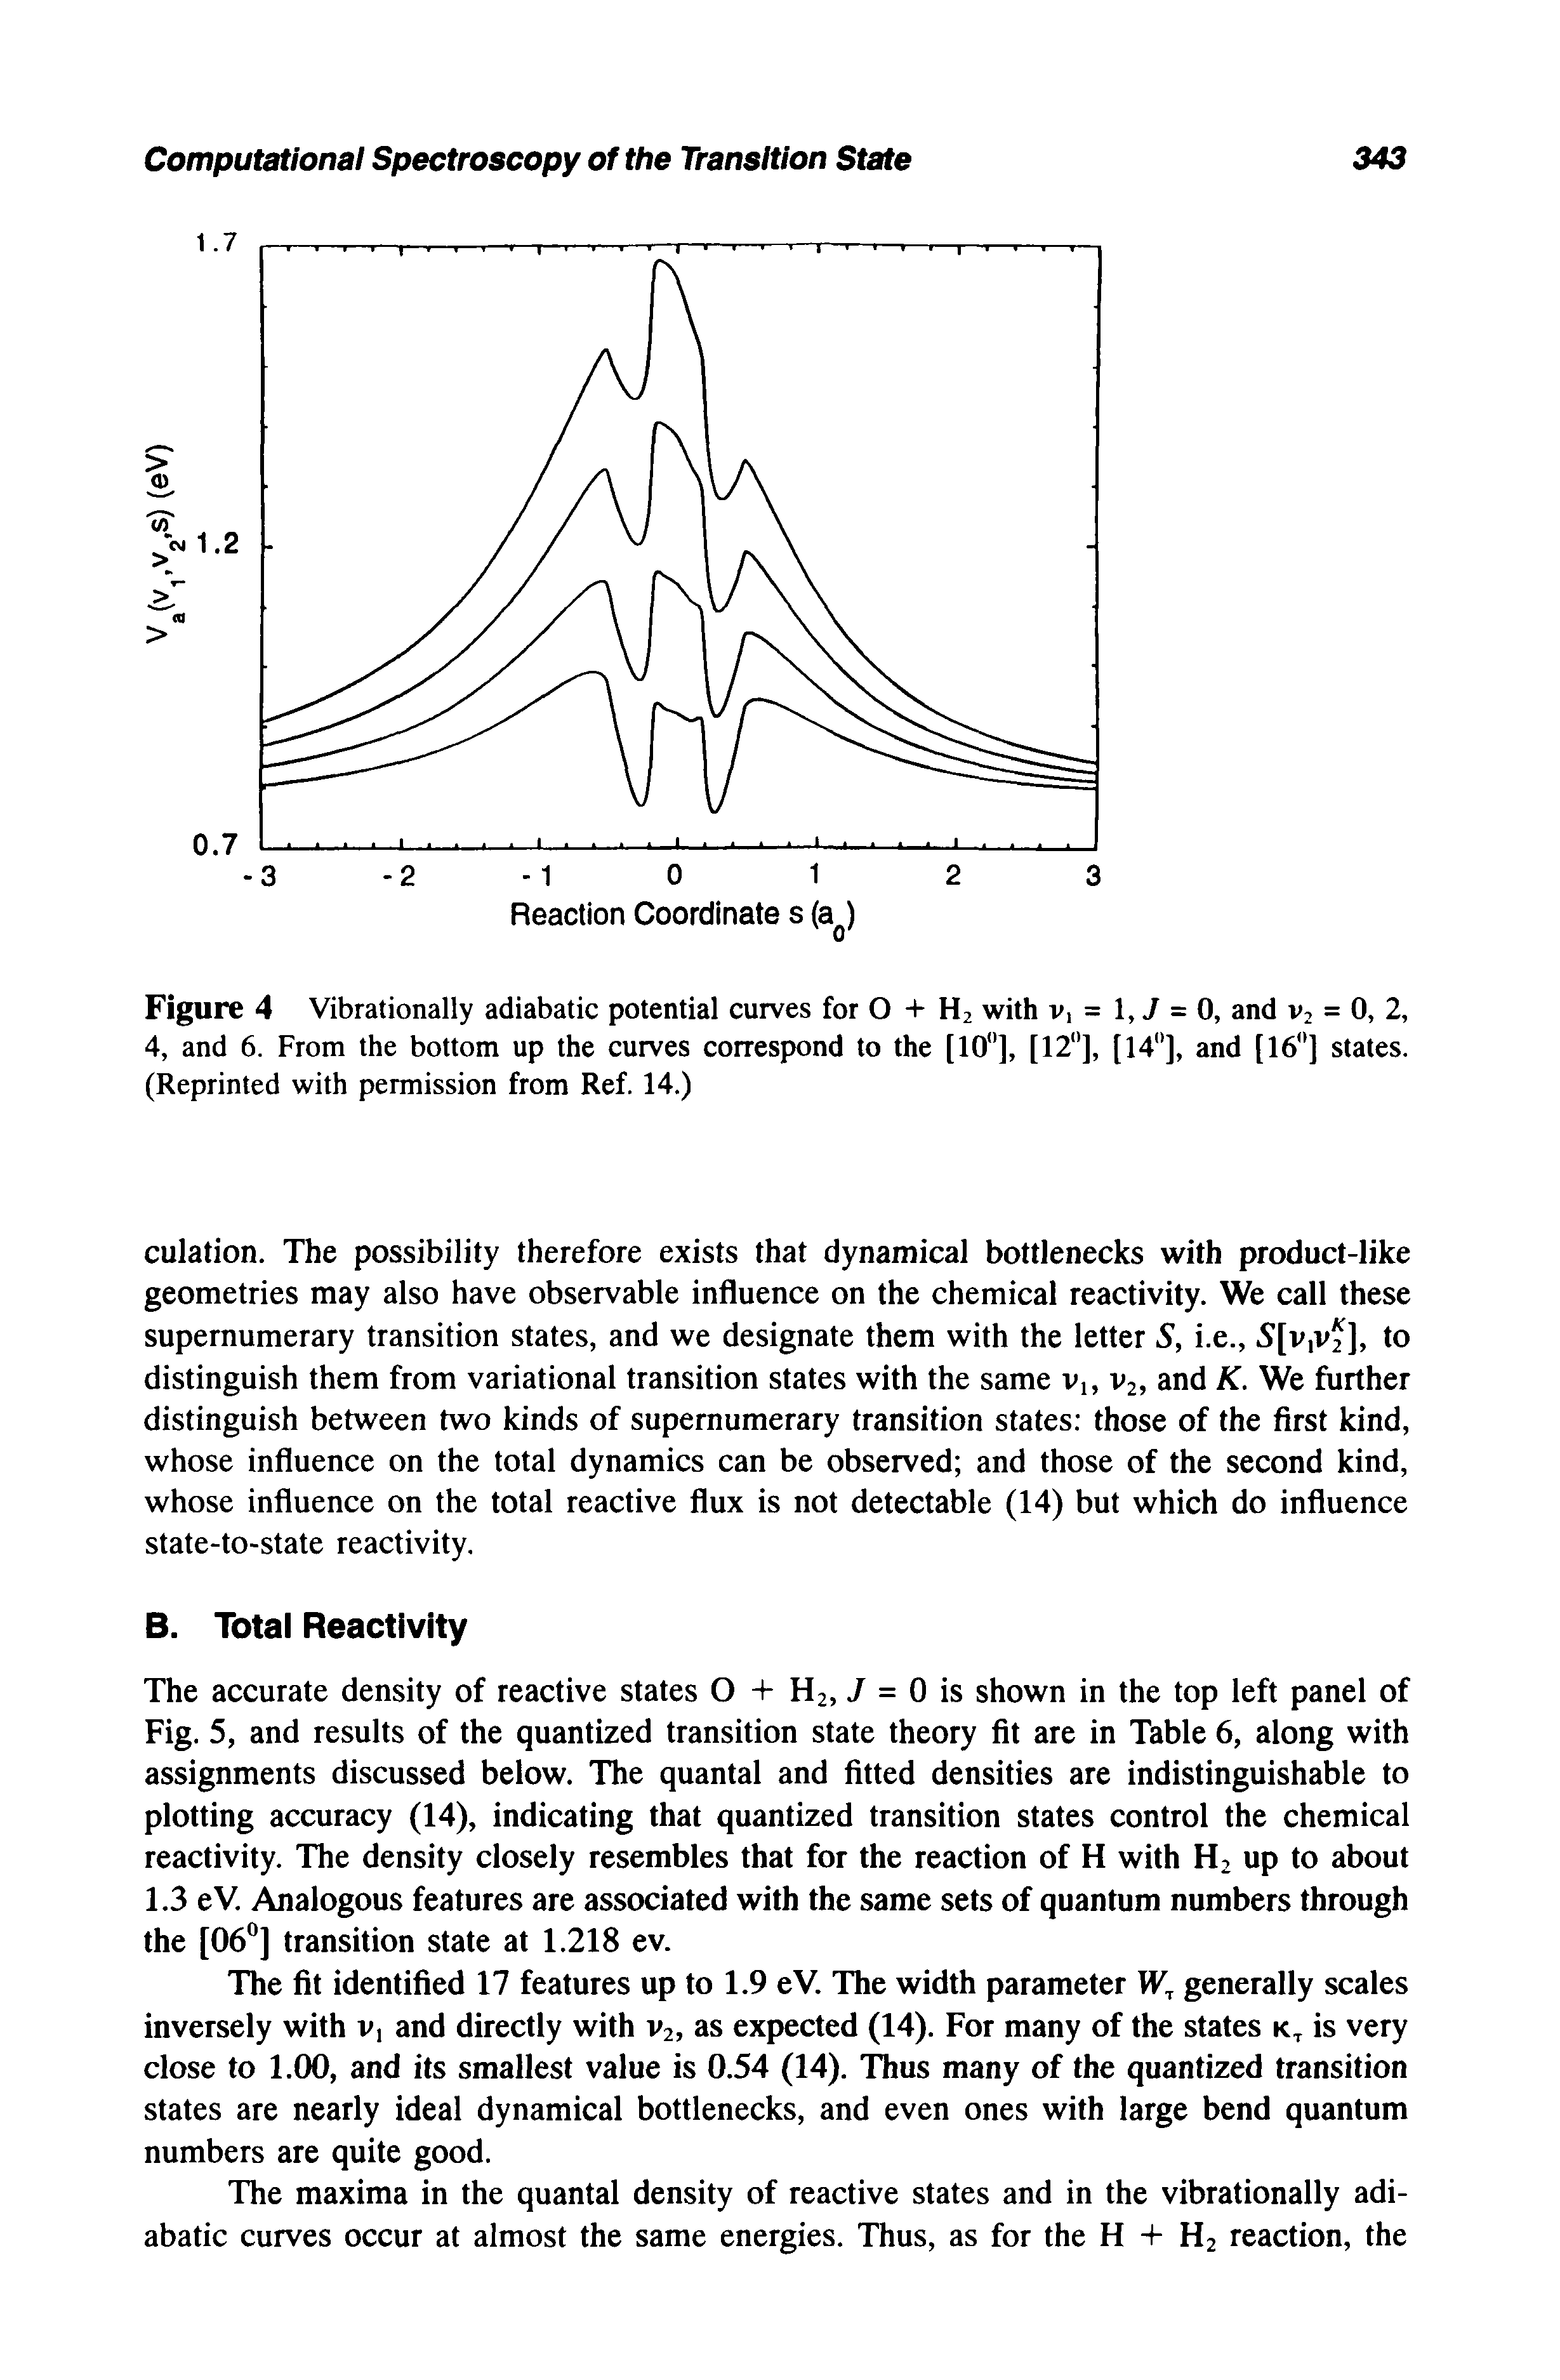 Figure 4 Vibrationally adiabatic potential curves for O + H2 with v, = 1, J = 0, and v2 = 0, 2, 4, and 6. From the bottom up the curves correspond to the [10°], [12°], [14°], and [16°] states. (Reprinted with permission from Ref. 14.)...